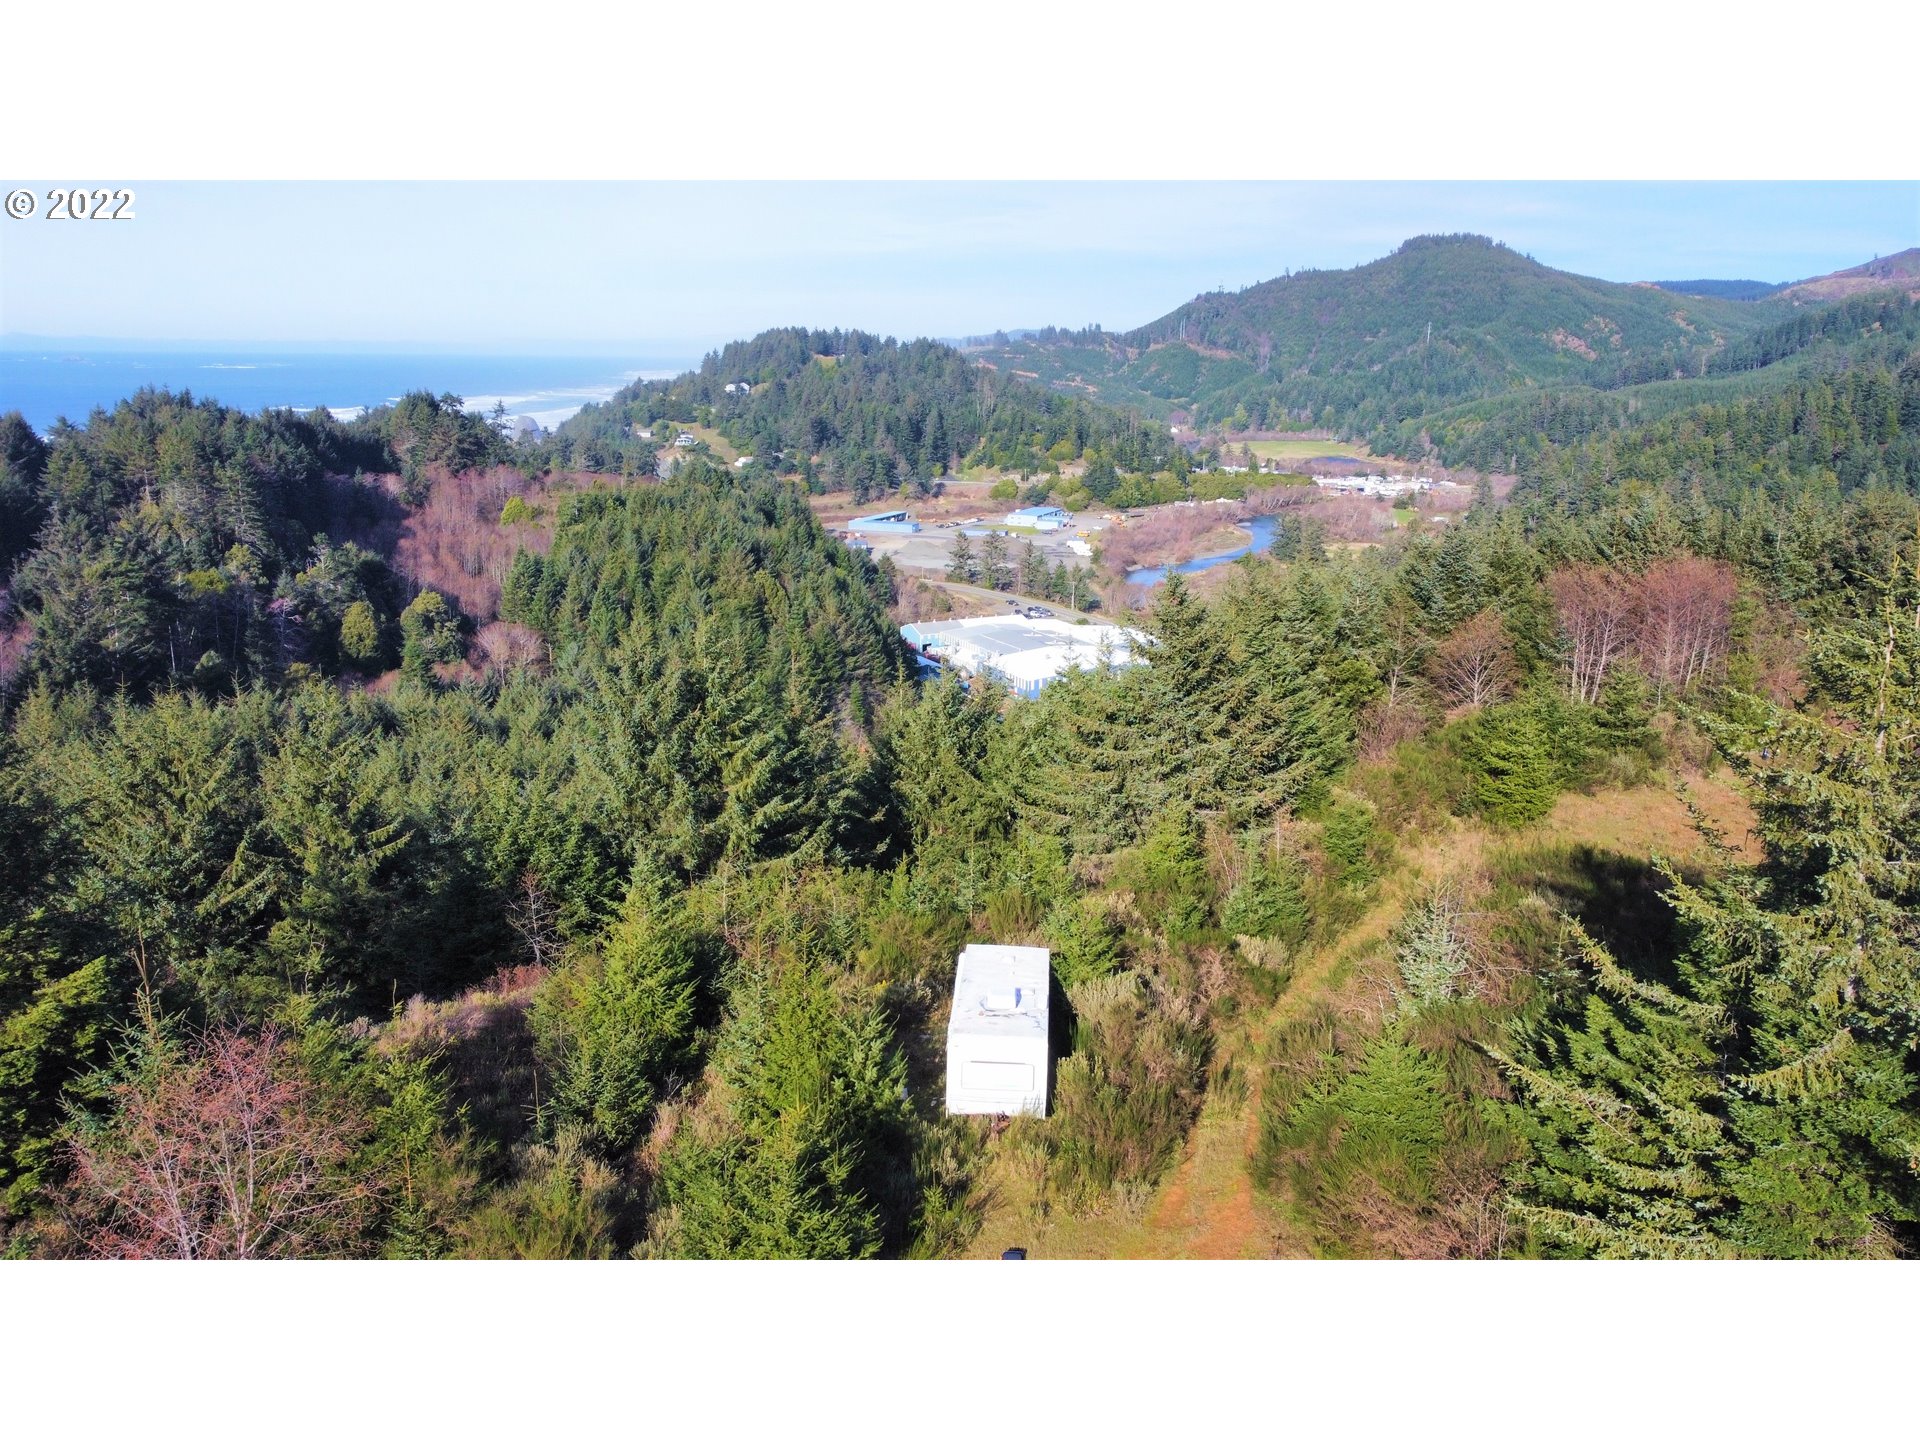  Mill Stream RD Gold Beach, Brookings Home Listings - Pacific Coastal Real Estate